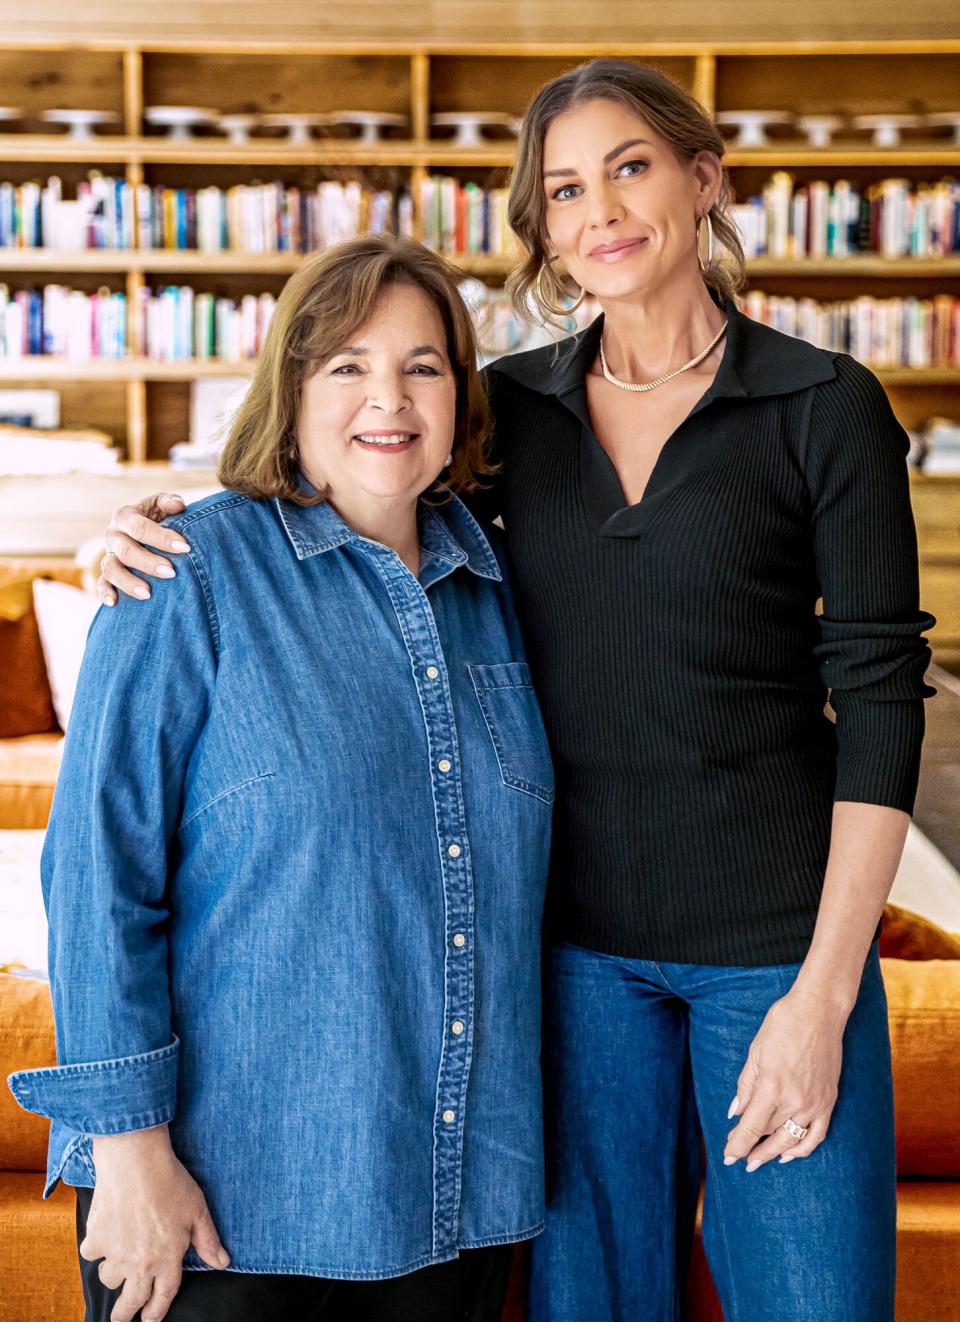 Ina Garten and Faith Hill, as seen on Be My Guest with Ina Garten, season 2.